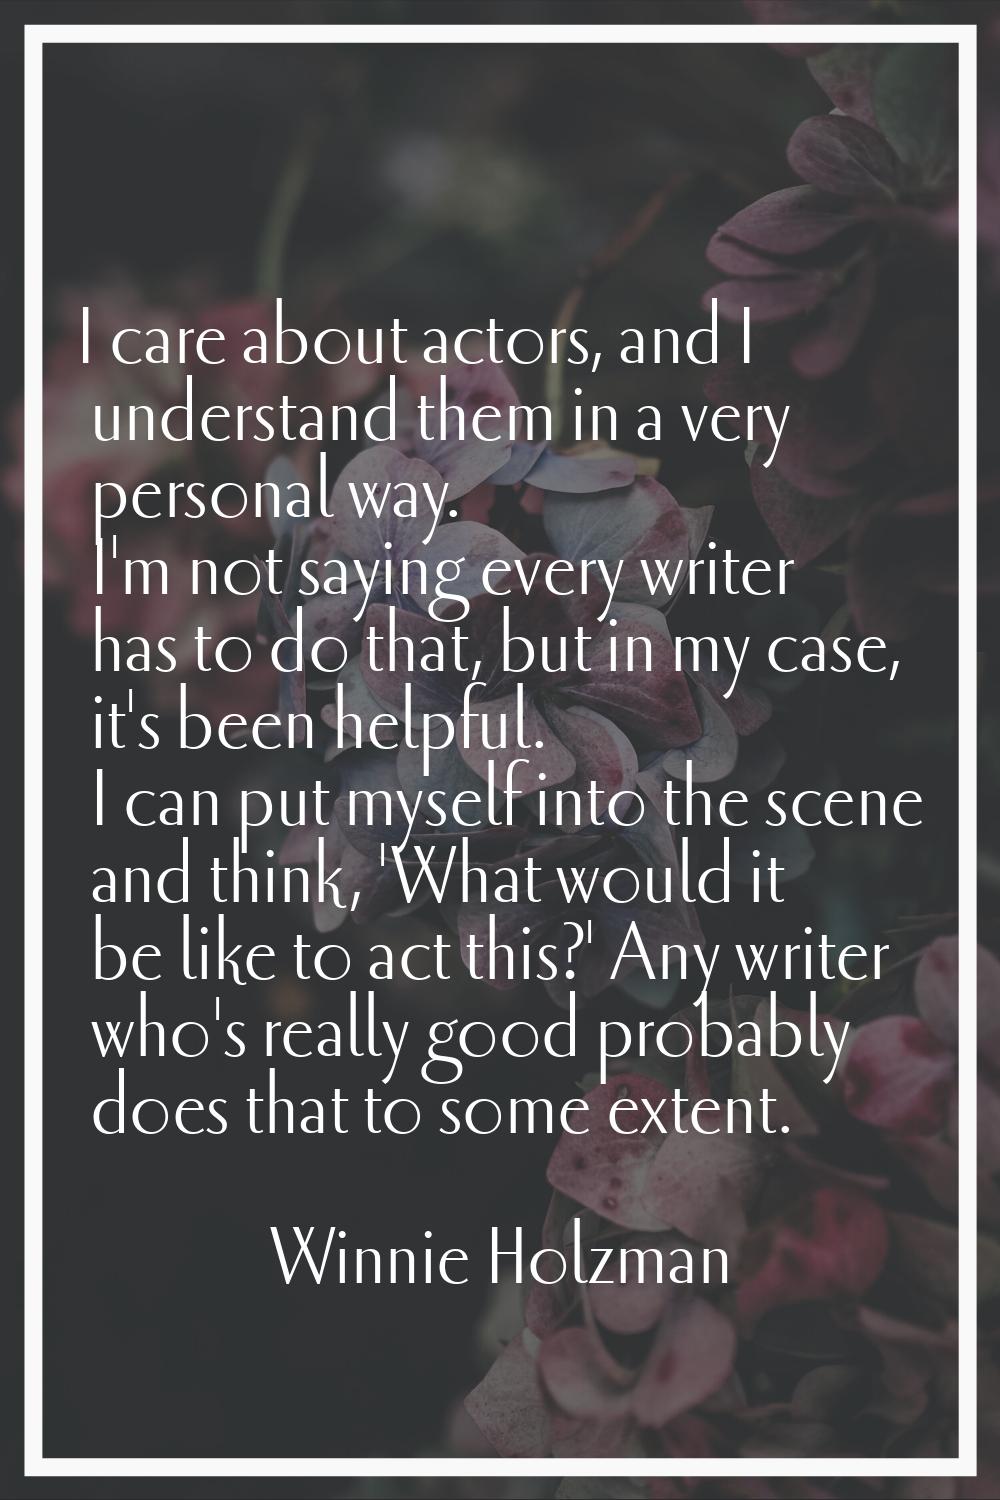 I care about actors, and I understand them in a very personal way. I'm not saying every writer has 